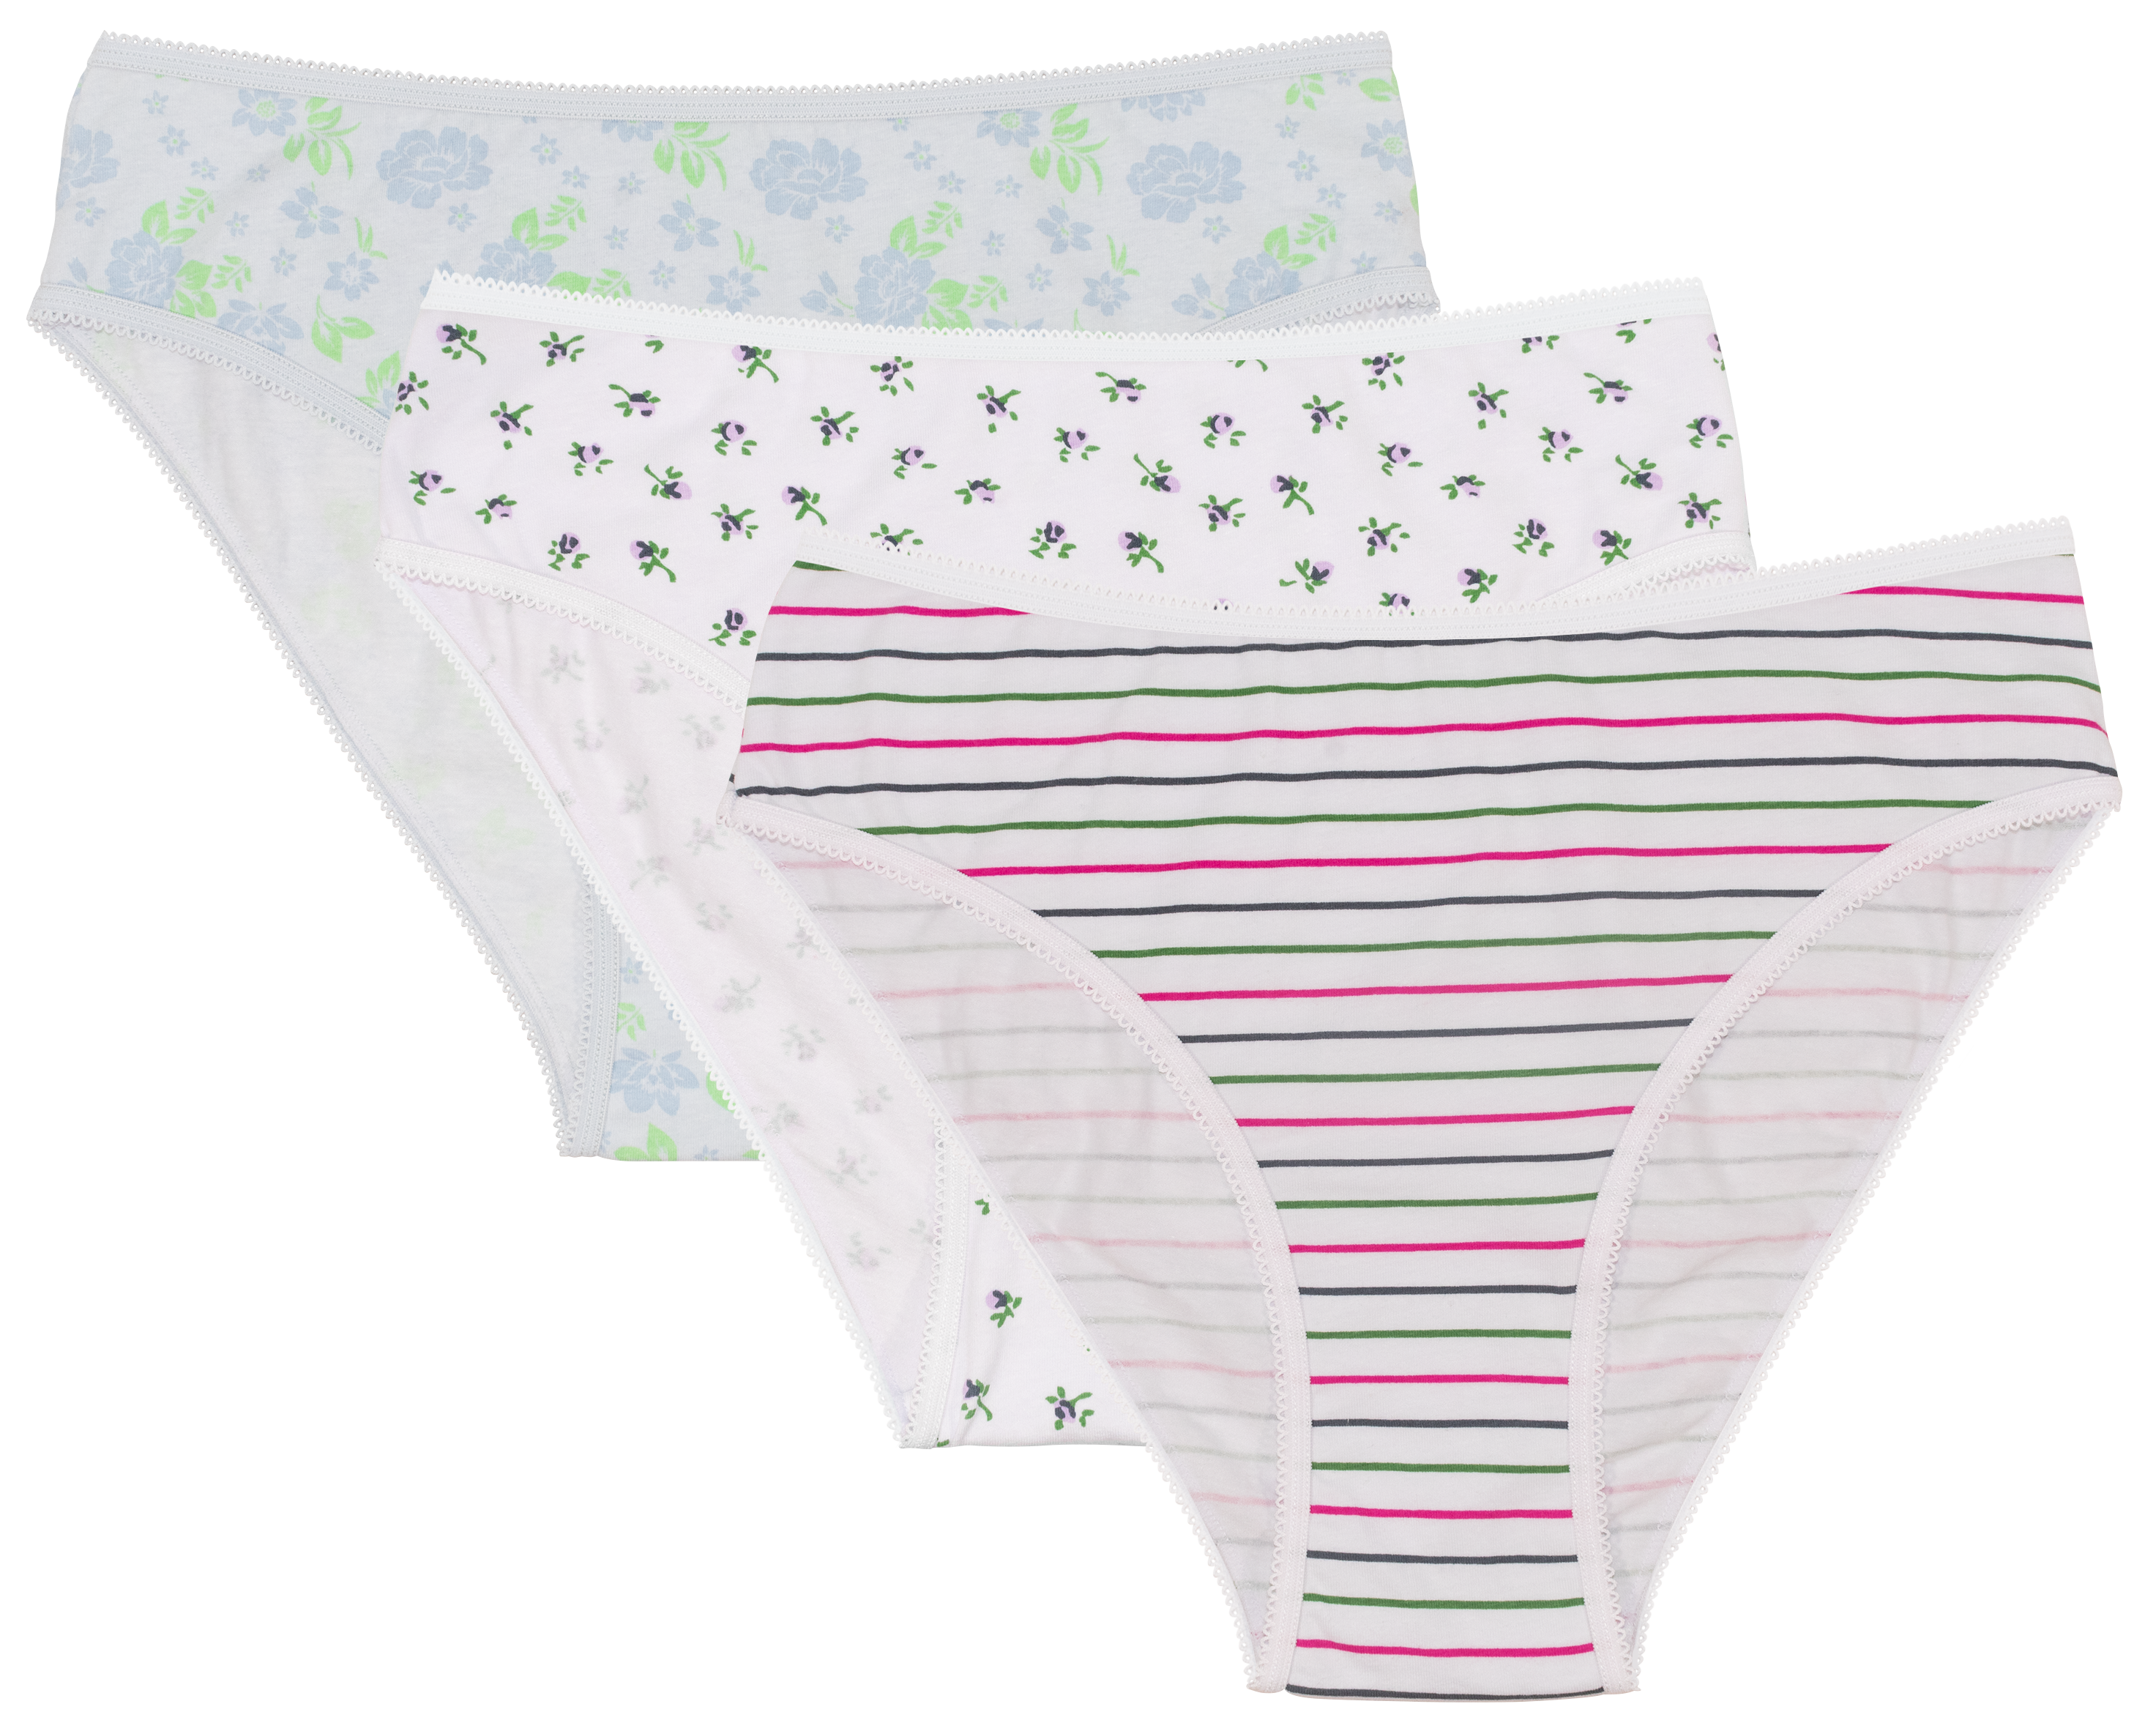 Full Coverage Panty Assorted Color 4 Pack (100% Cotton) – Teri Lingerie